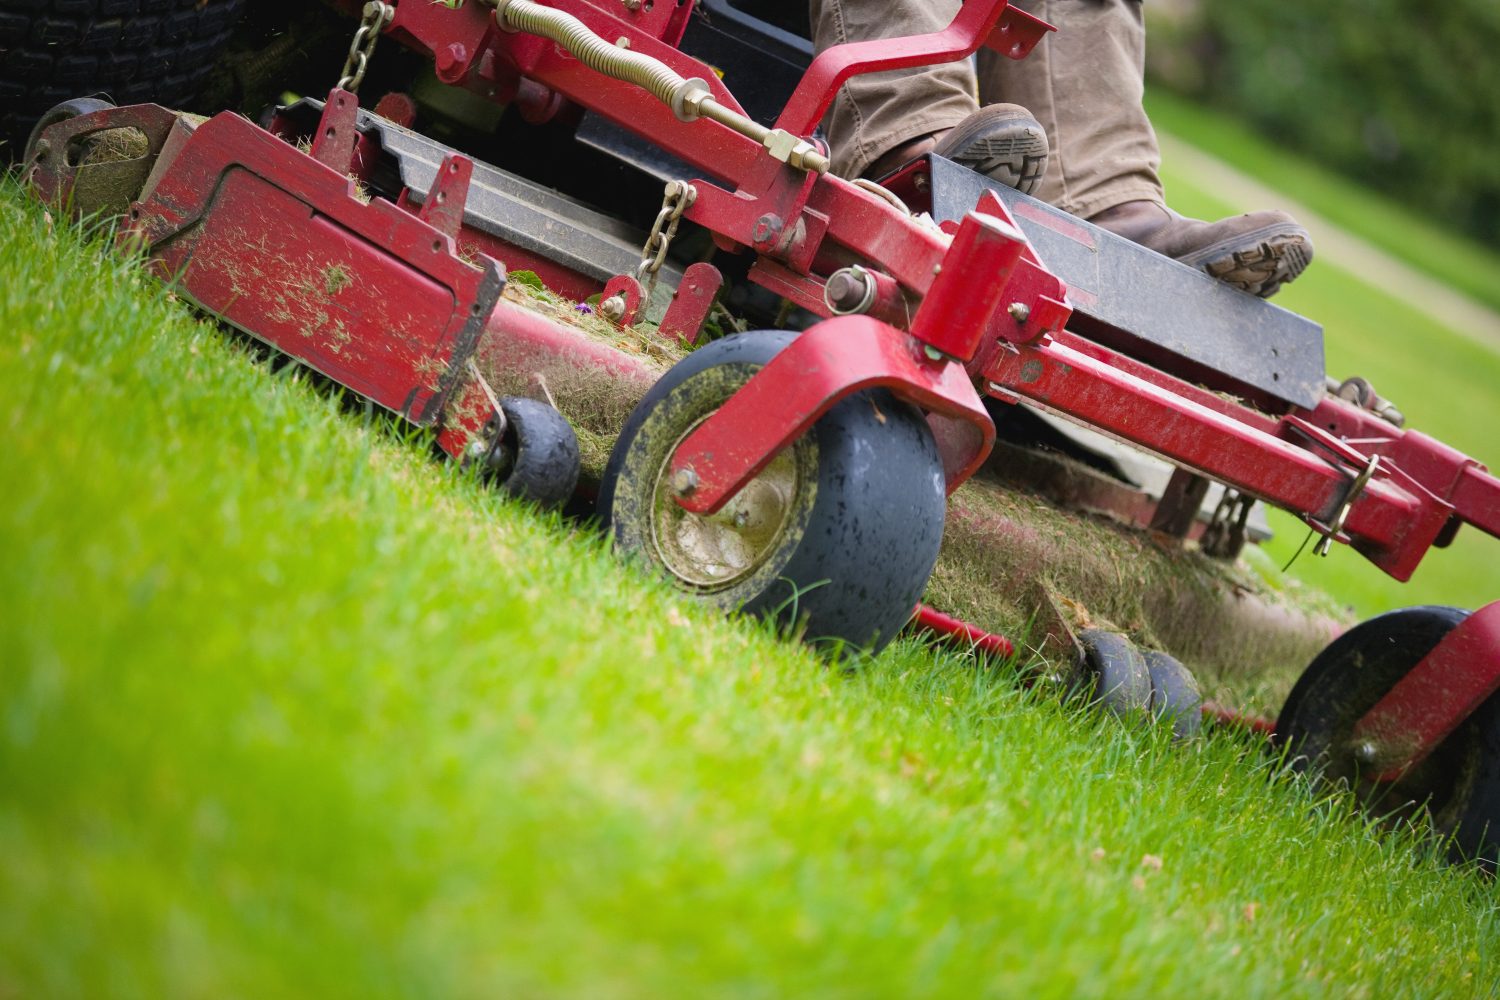 Spring lawn equipment: Keep safety in mind with these tips